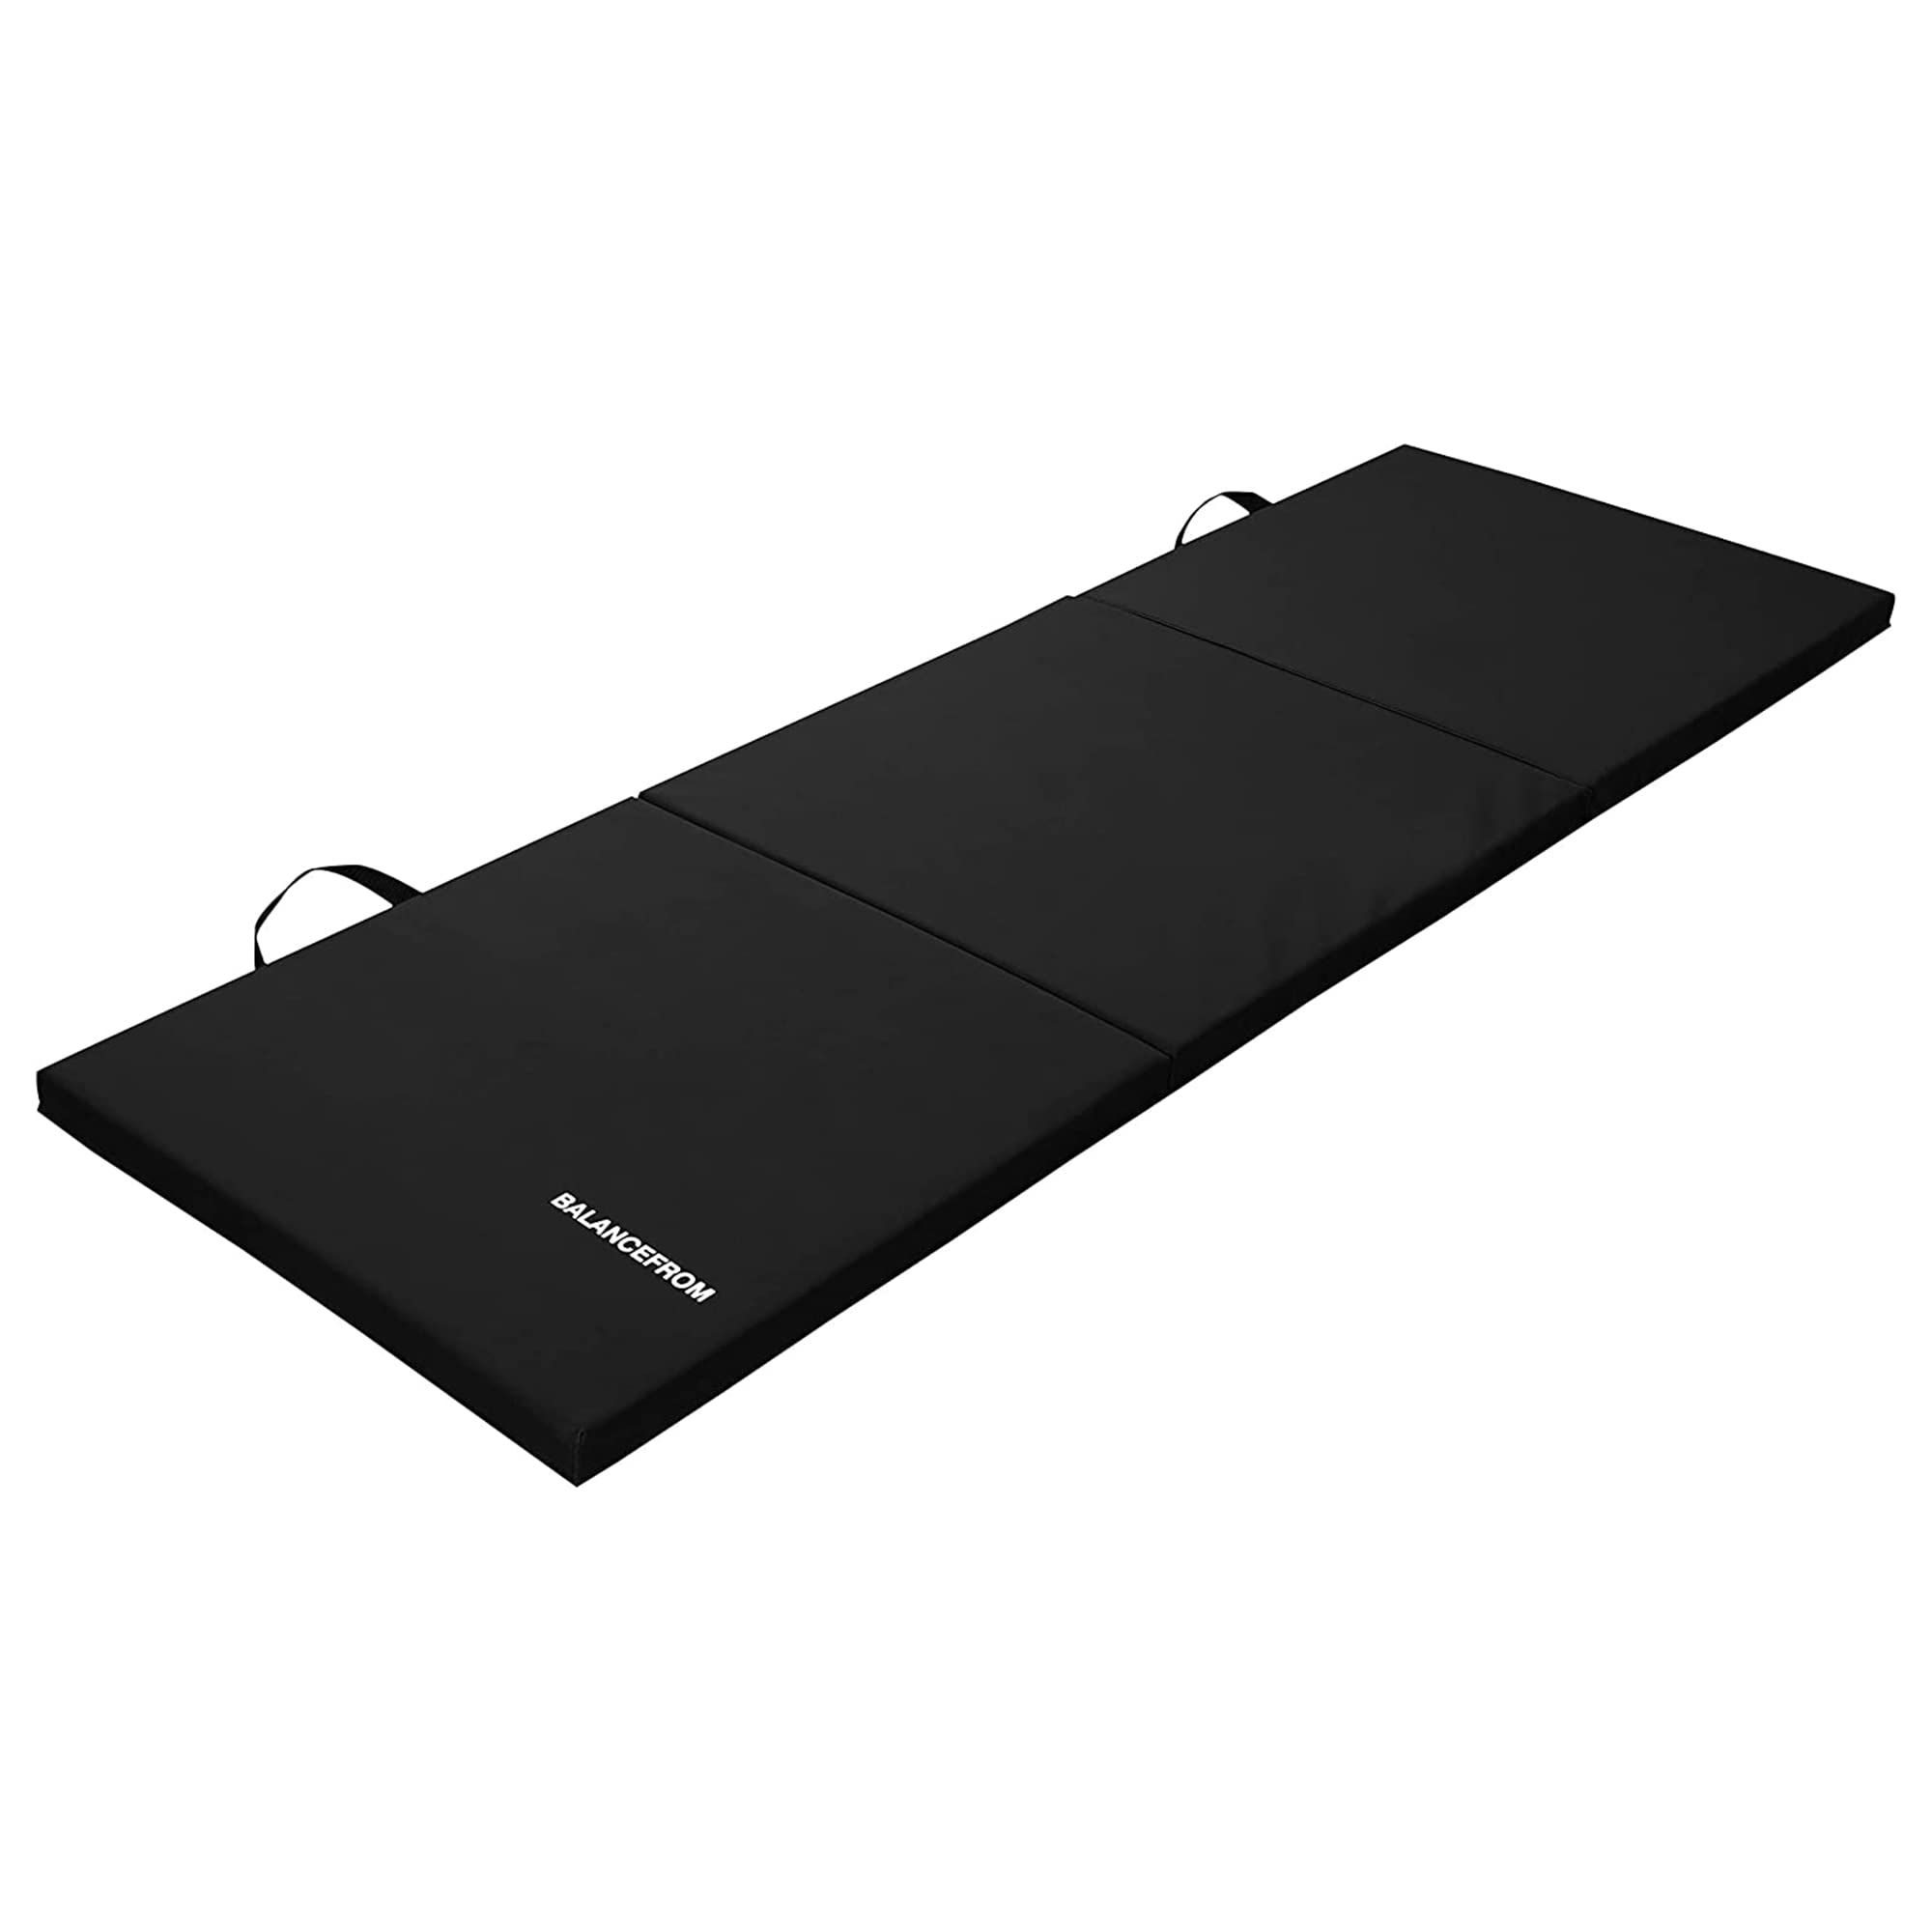 BalanceFrom Three Fold Folding Exercise Mat with Carrying Handles for MMA, Gymnastics and Home Gym Protective Flooring